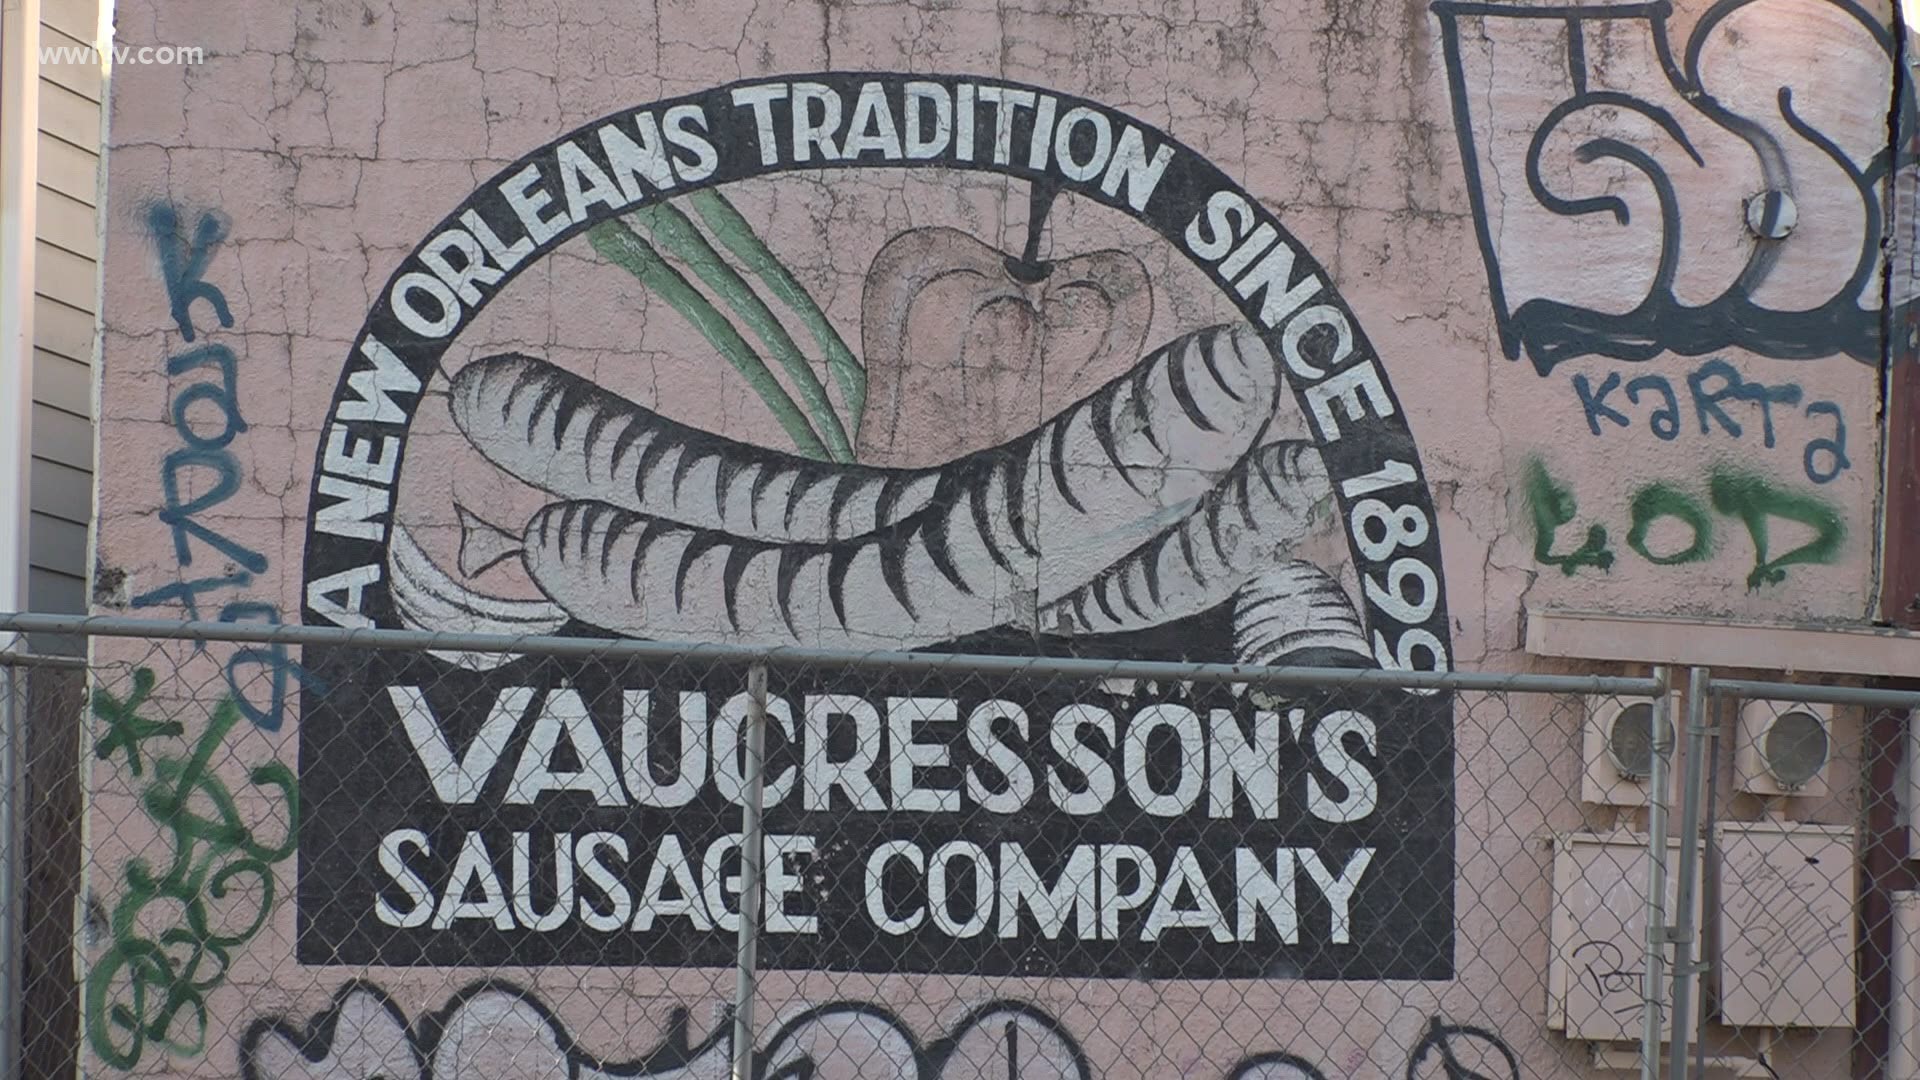 Vaucresson Sausage Company is making the move to return to the city after shutting down after Hurricane Katrina.